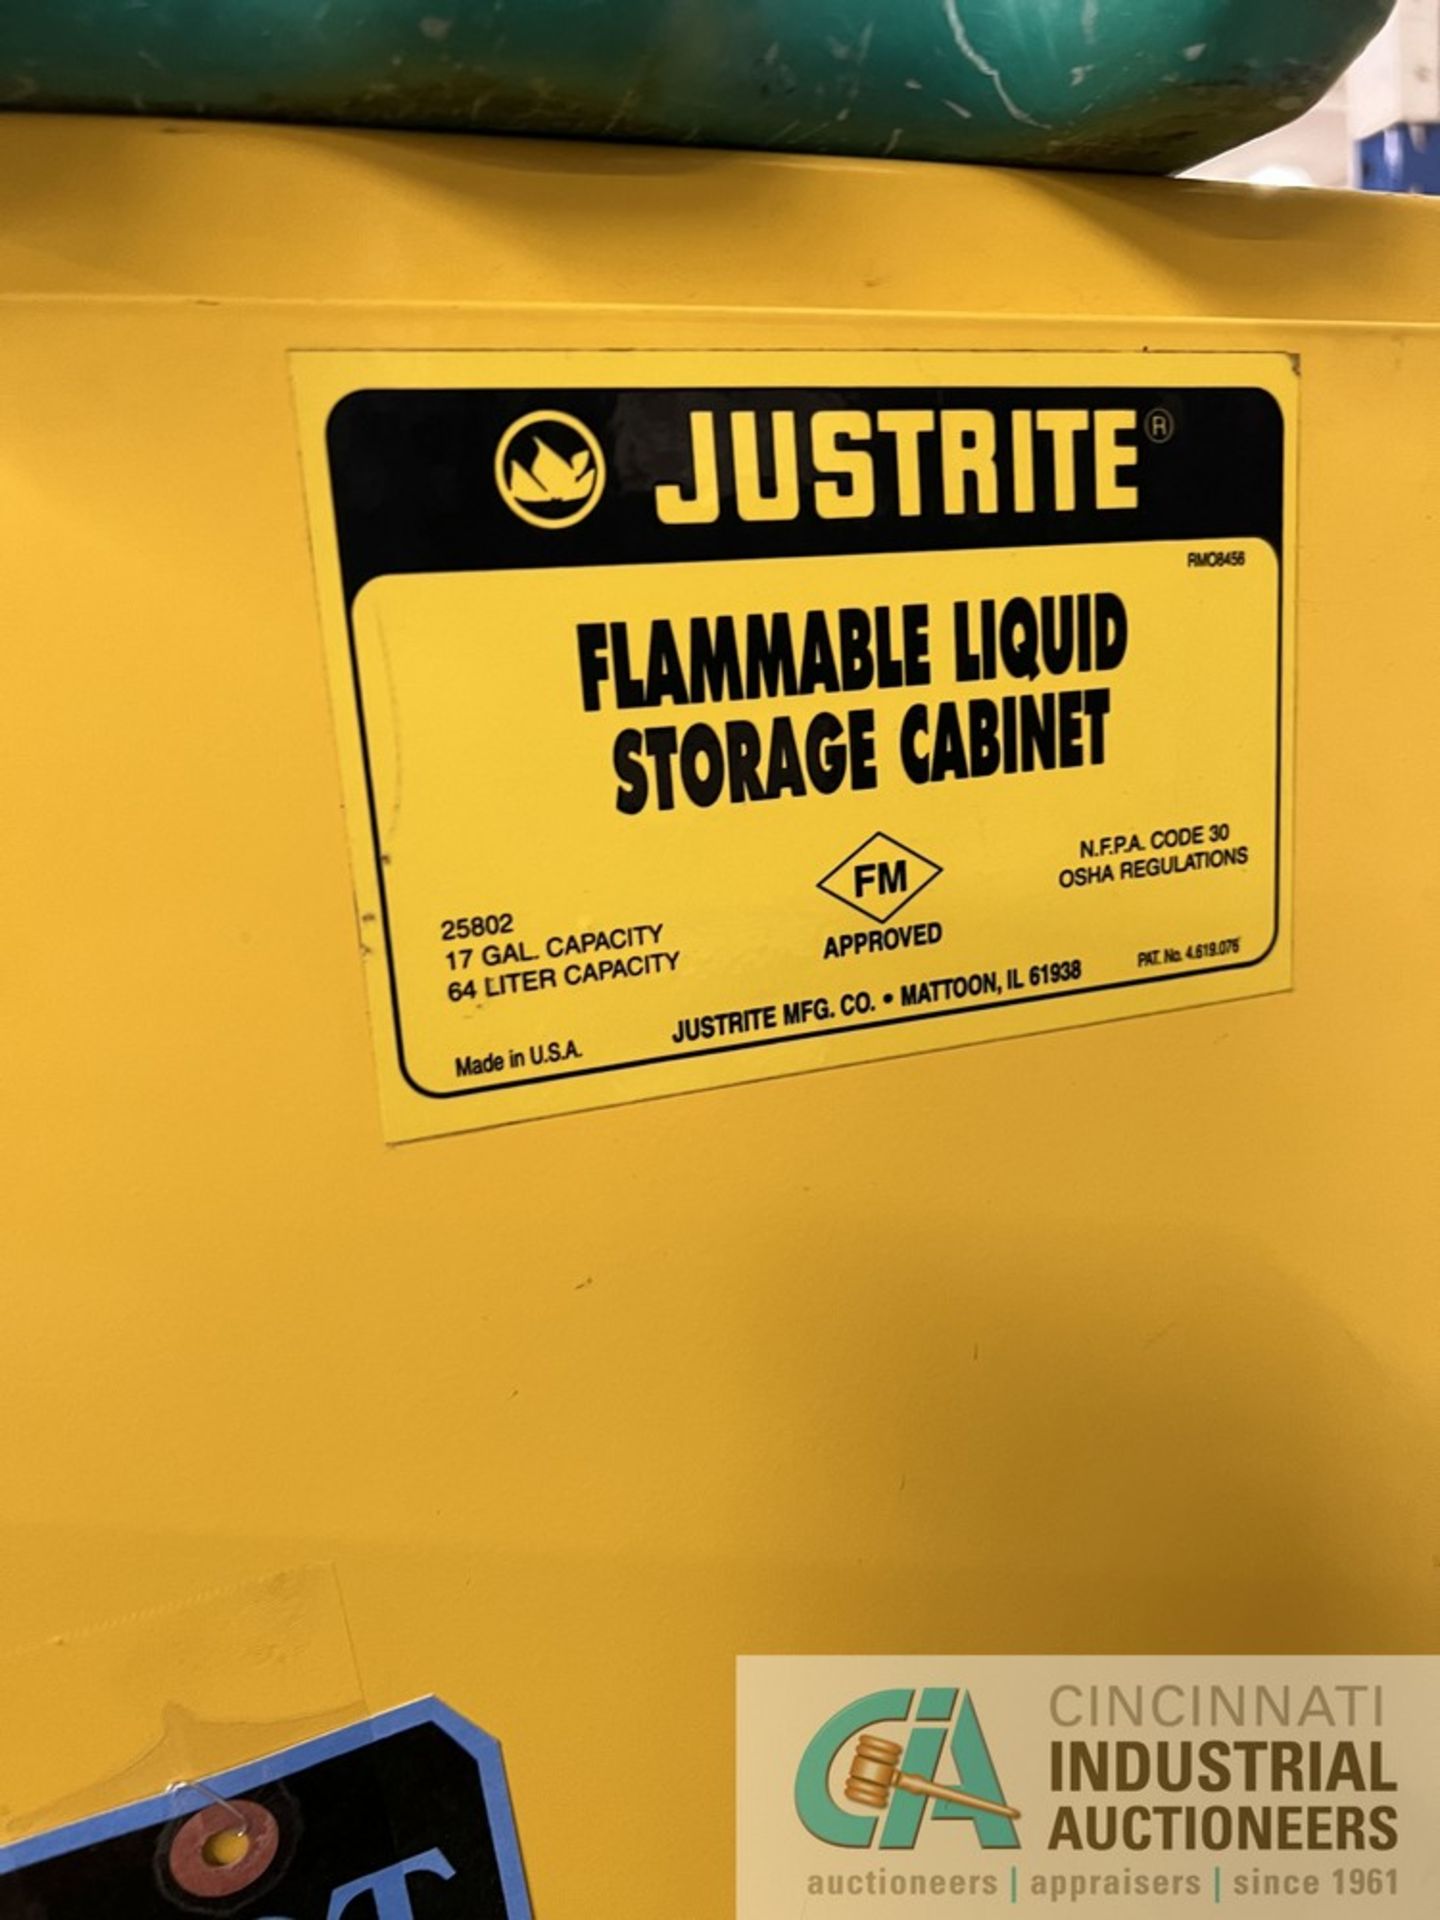 (LOT) 30 AND 17 GALLON CAP JUSTRITE STACKABLE FLAMMABLE LIQUID CABINET (WAREHOUSE) - Image 2 of 3